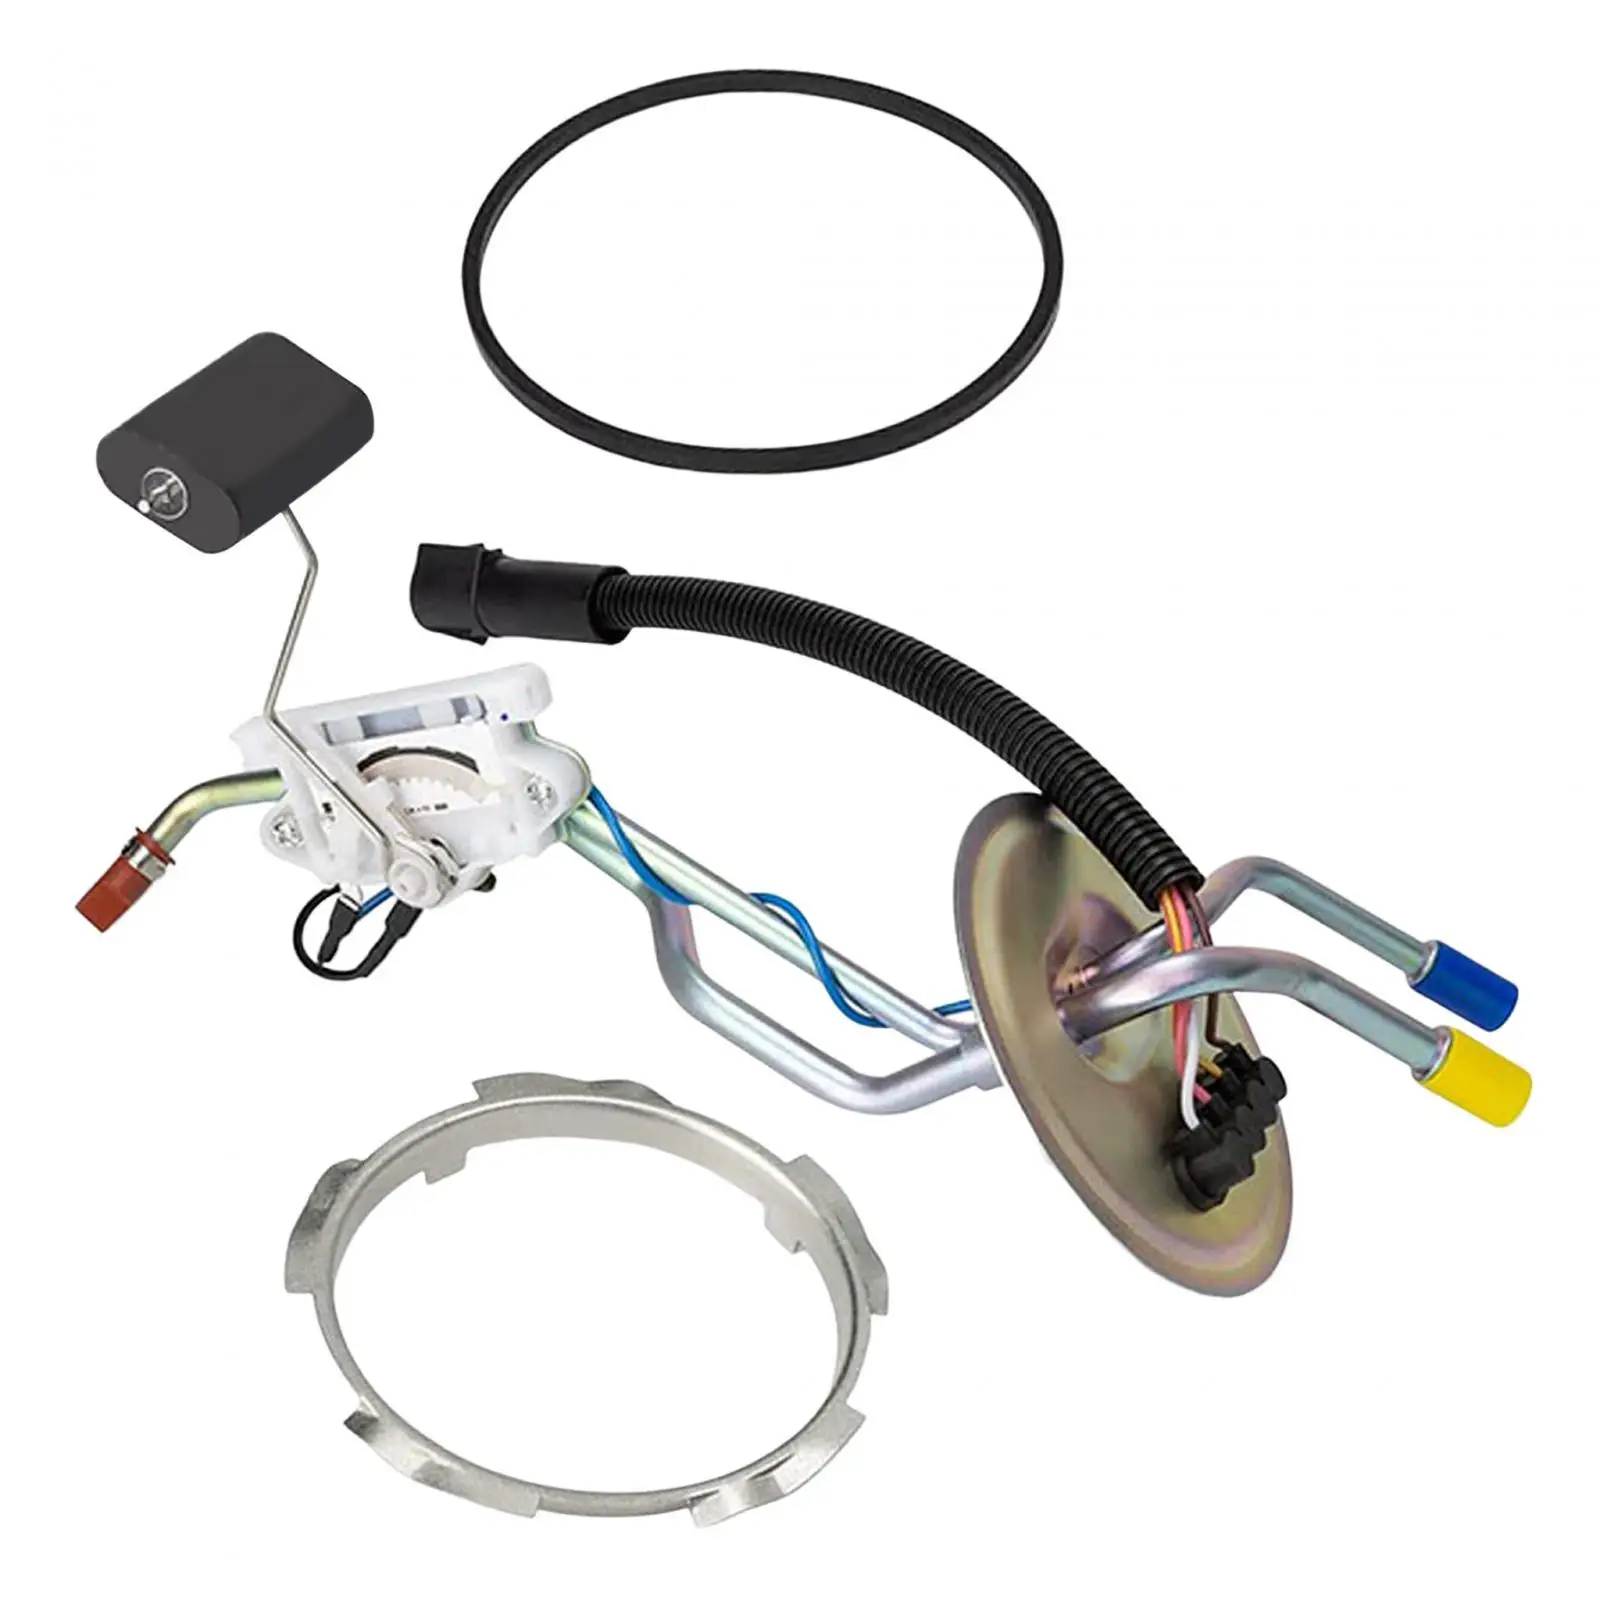 Fuel Pump Sending Unit Repair Parts for Ford F250 F350 94-97 Accessories Professional Easy Installation